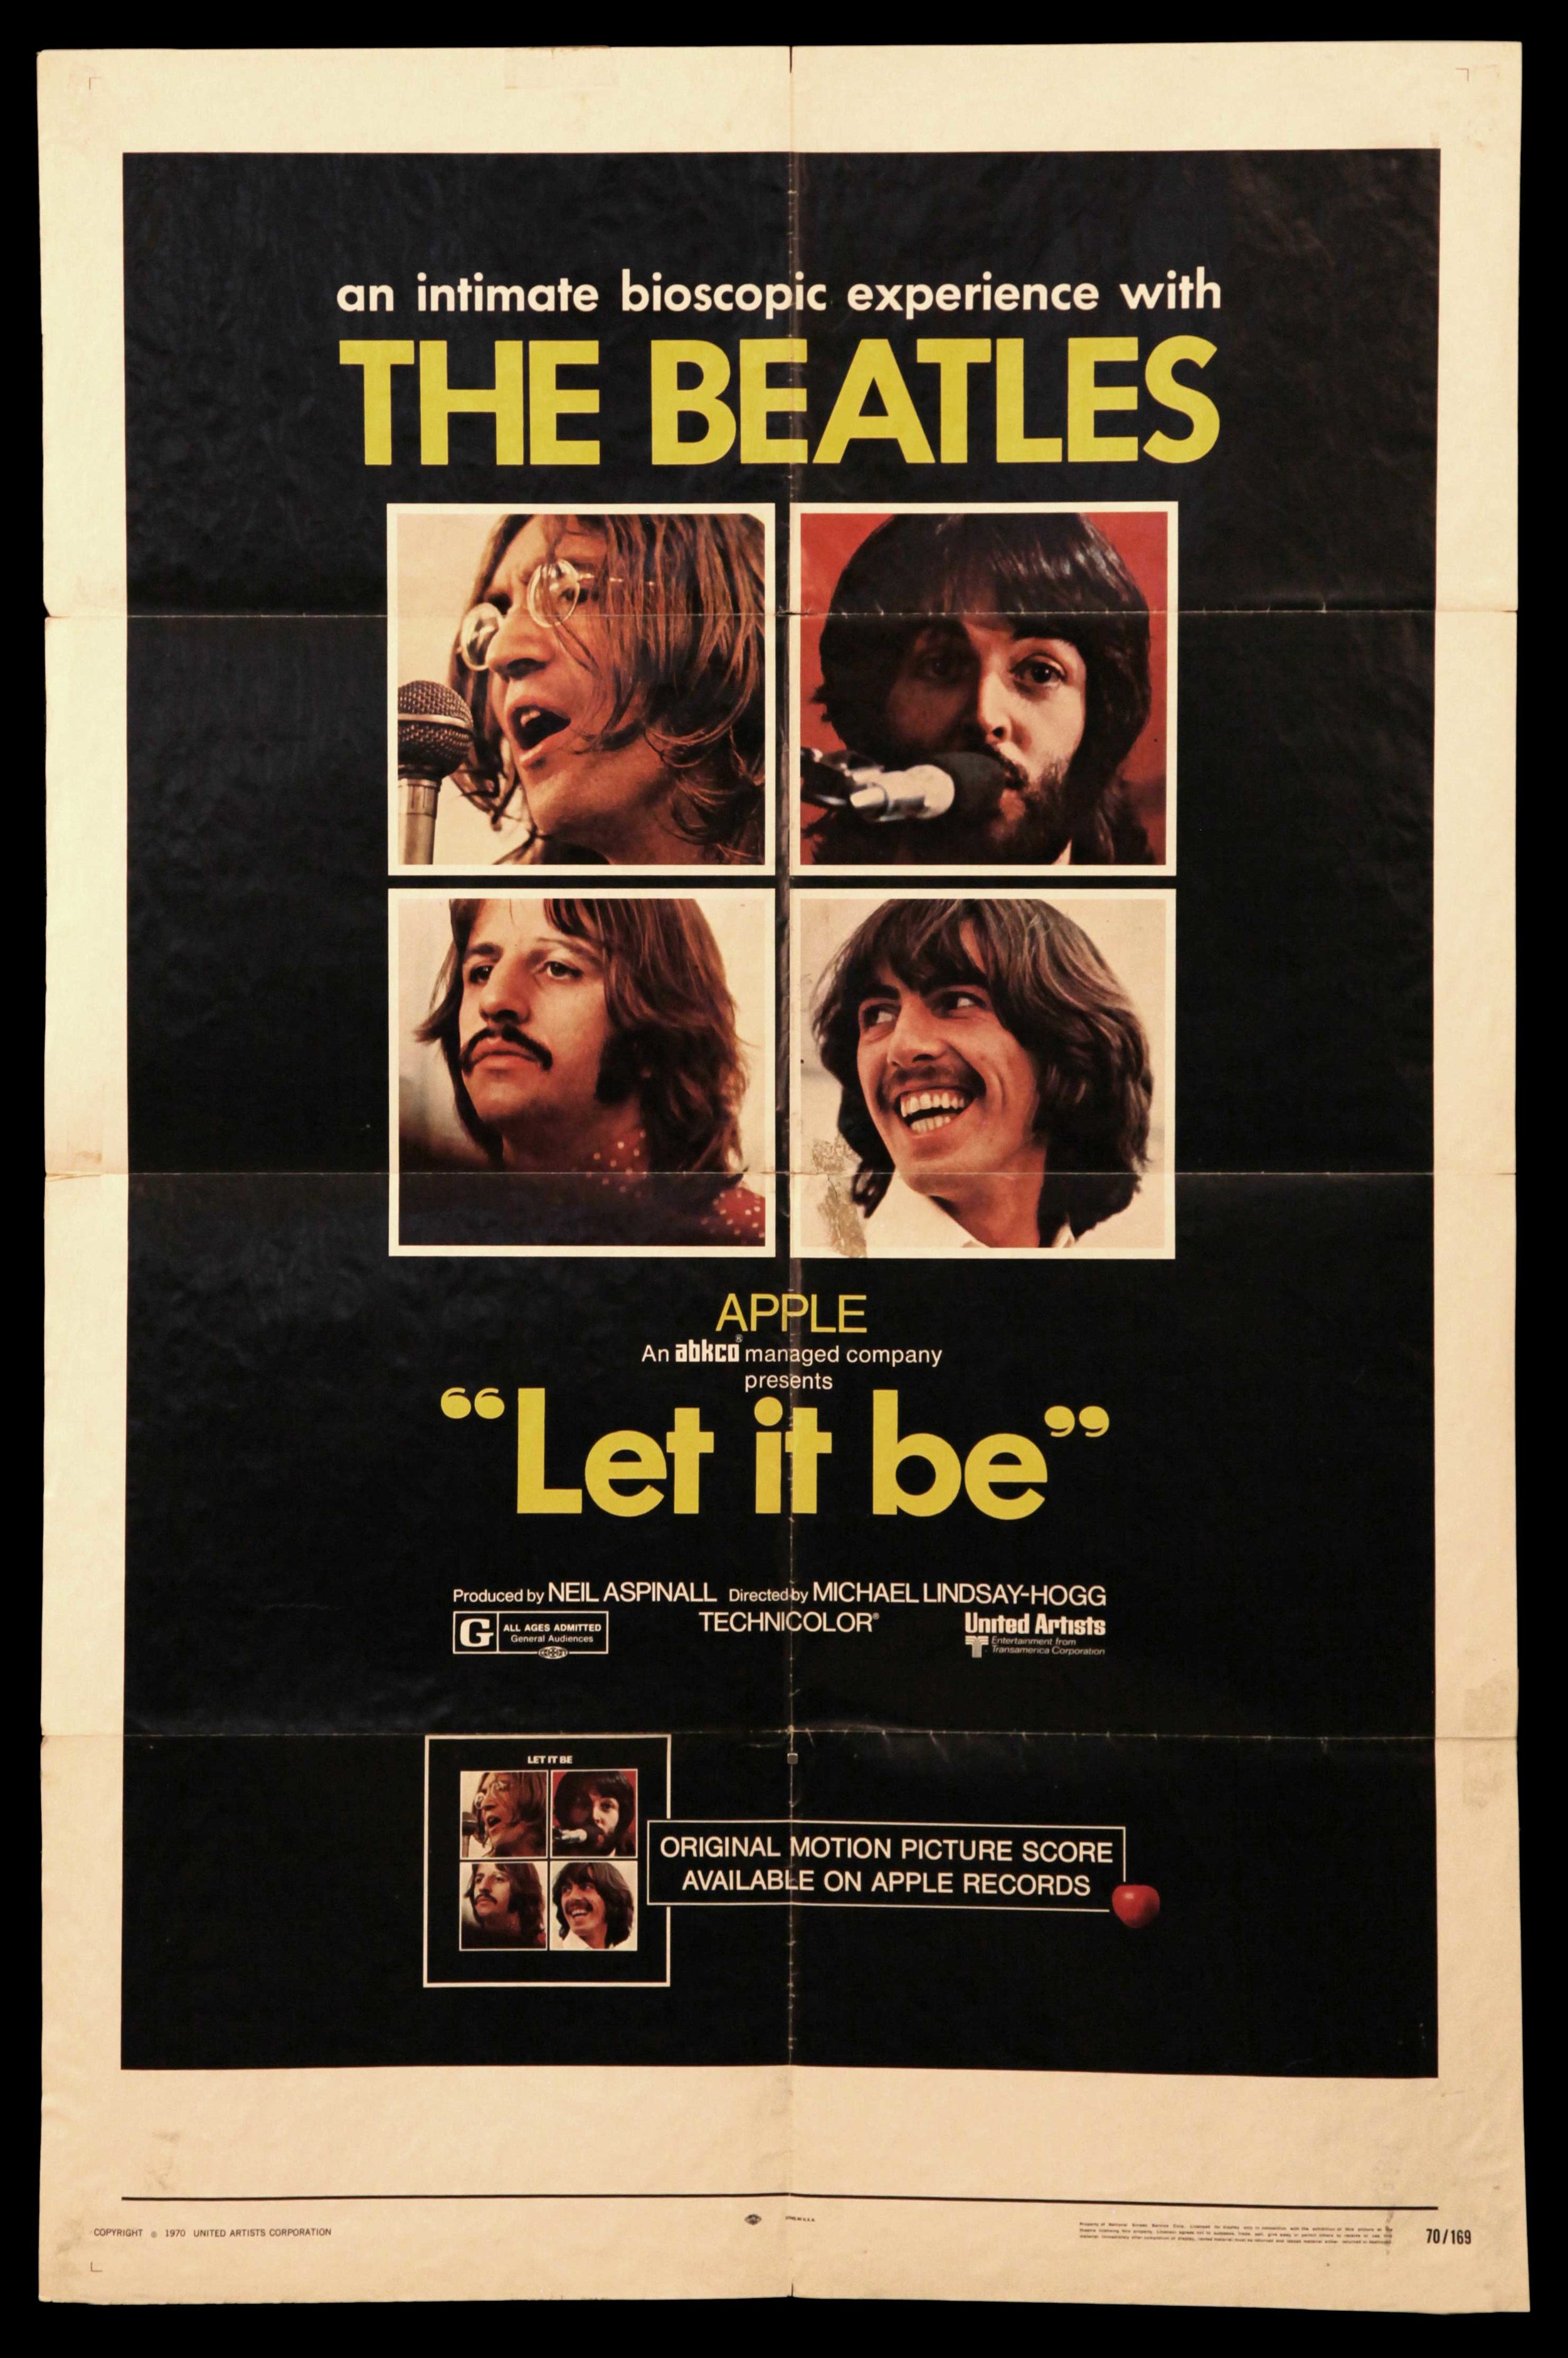 The Beatles "Let It Be" (1970)